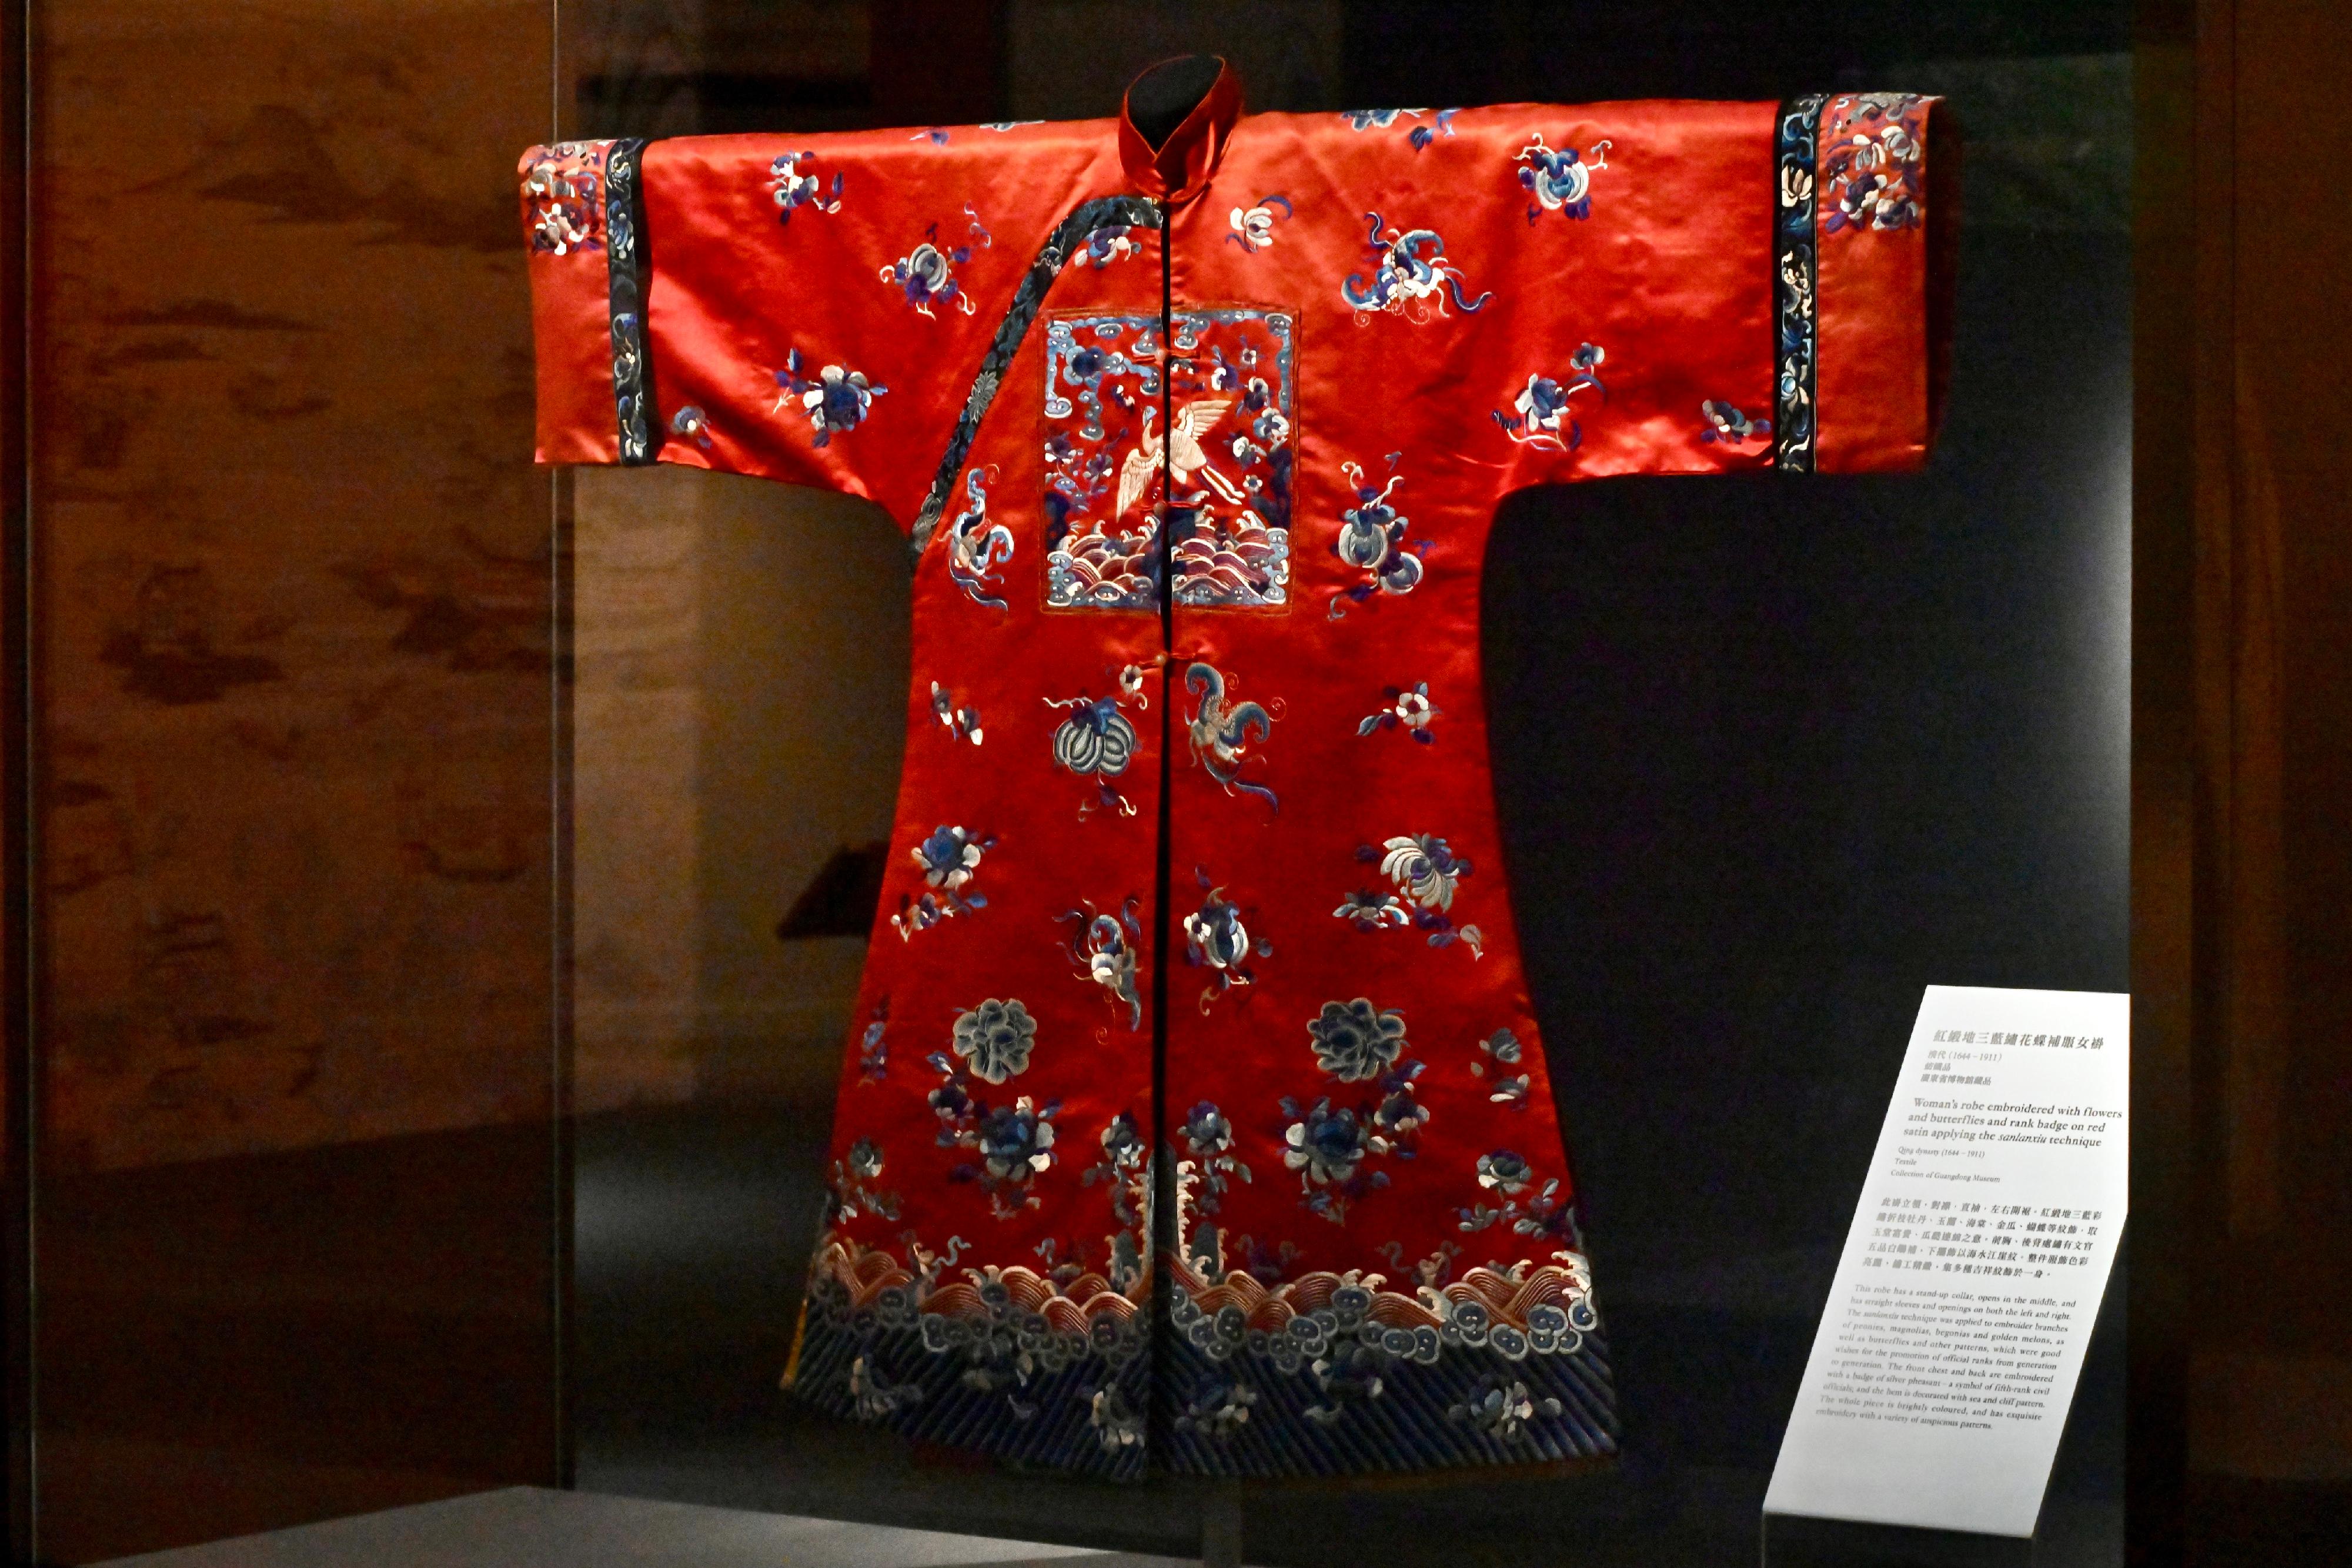 The opening ceremony of the Hong Kong stop of the touring exhibition "A Tale of Three Cities: Guangdong-Hong Kong-Macao Greater Bay Area and Export of Silk Products in the Ming and Qing Dynasties" was held today (September 7) at the Hong Kong Museum of Art. Picture shows a woman's robe embroidered with flowers and butterflies and rank badge on red satin applying the "sanlanxiu" technique from the Qing dynasty, which is a grade-three national treasure. (Collection of Guangdong Museum) 